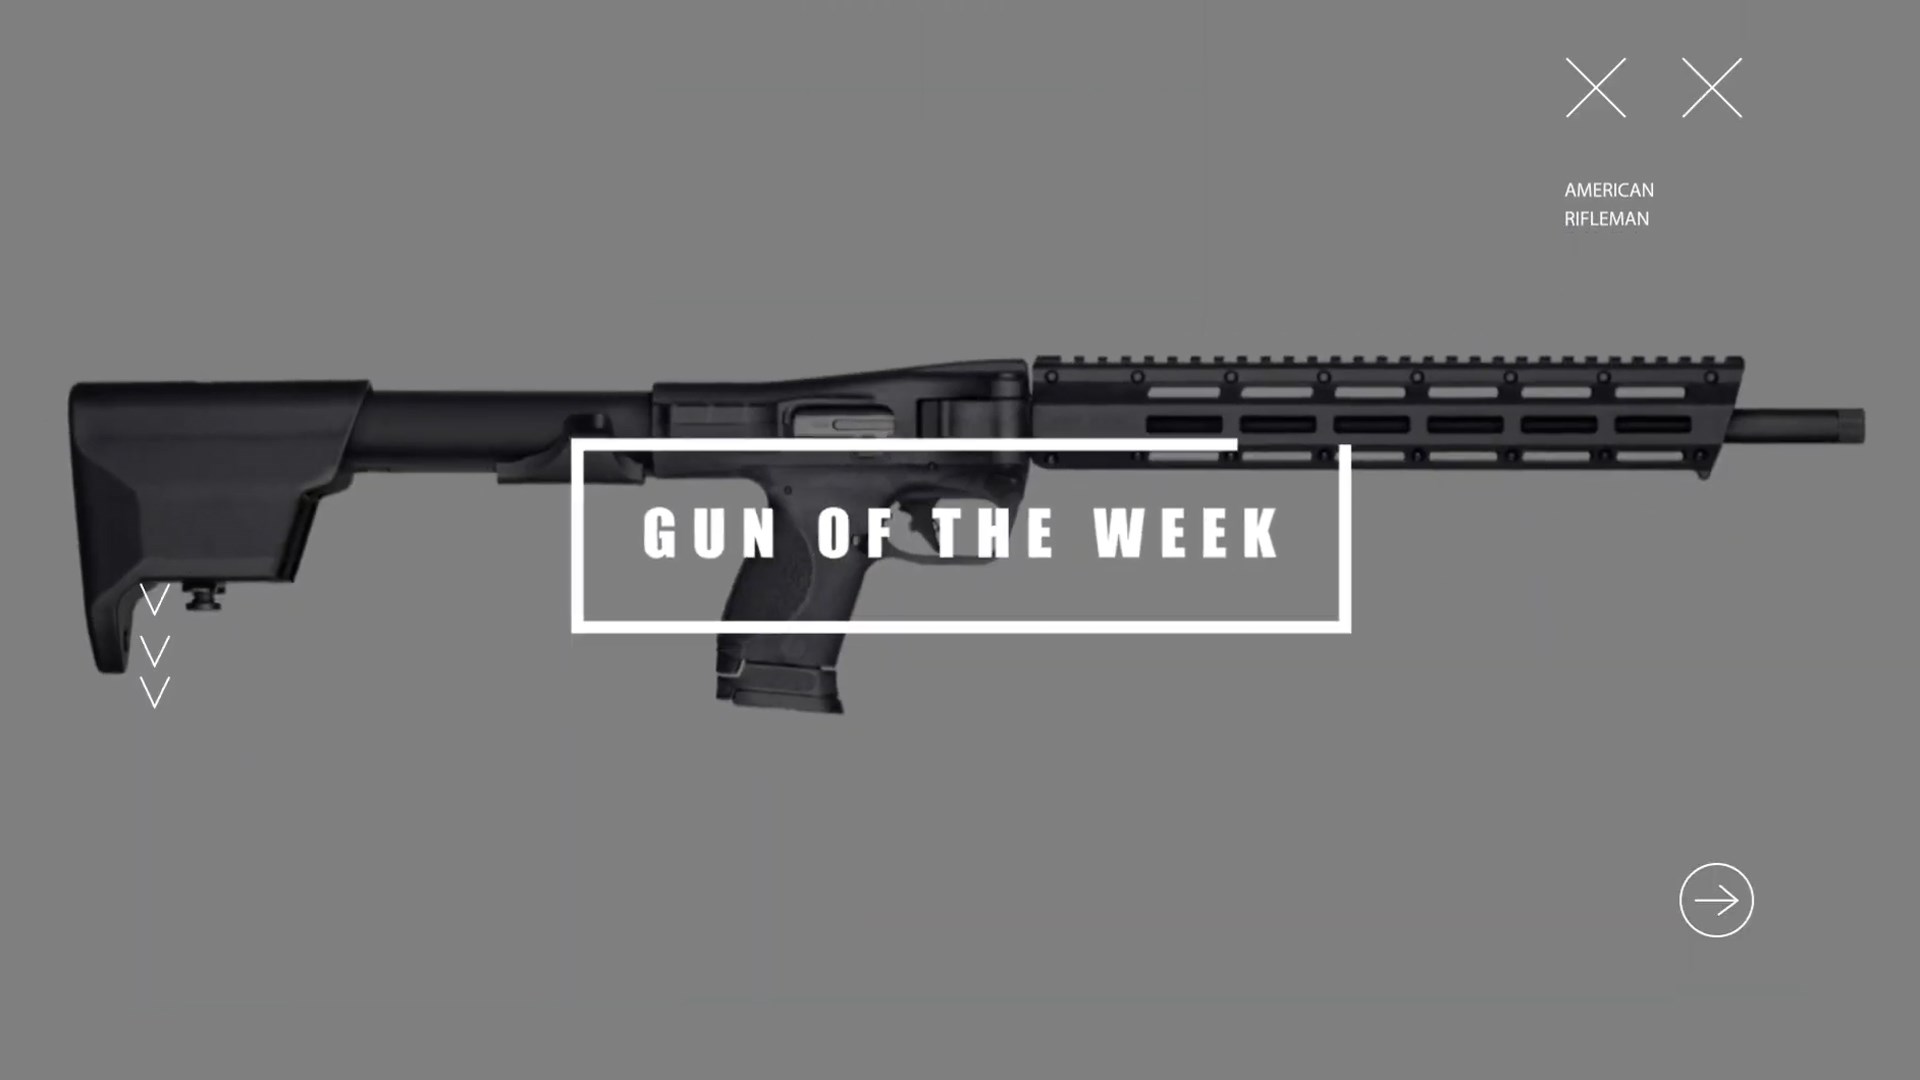 GUN OF THE WEEK title screen text box overlay smith & wesson FPC carbine background right-side view soft AMERICAN RIFLEMAN X X ARROW